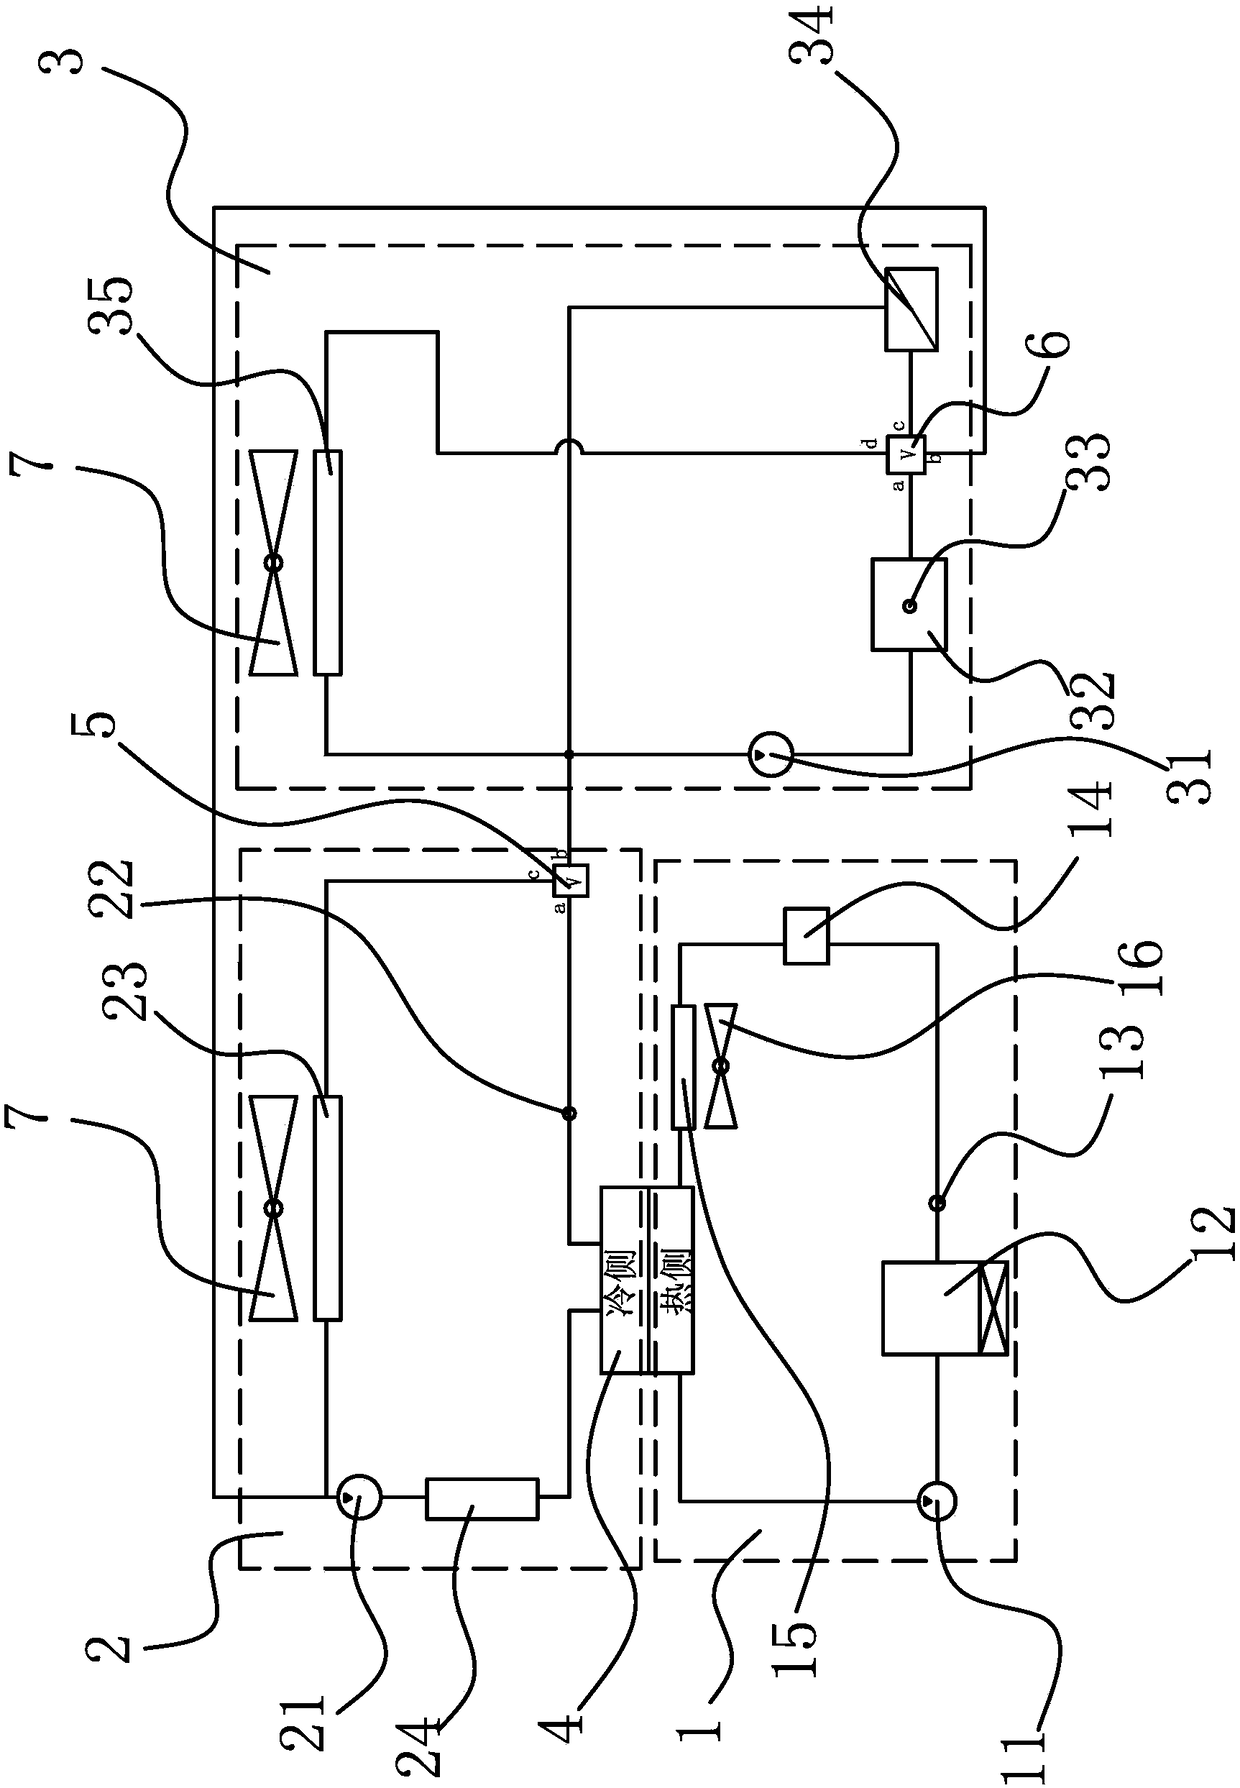 Heat preservation system and method for batteries of electric vehicle